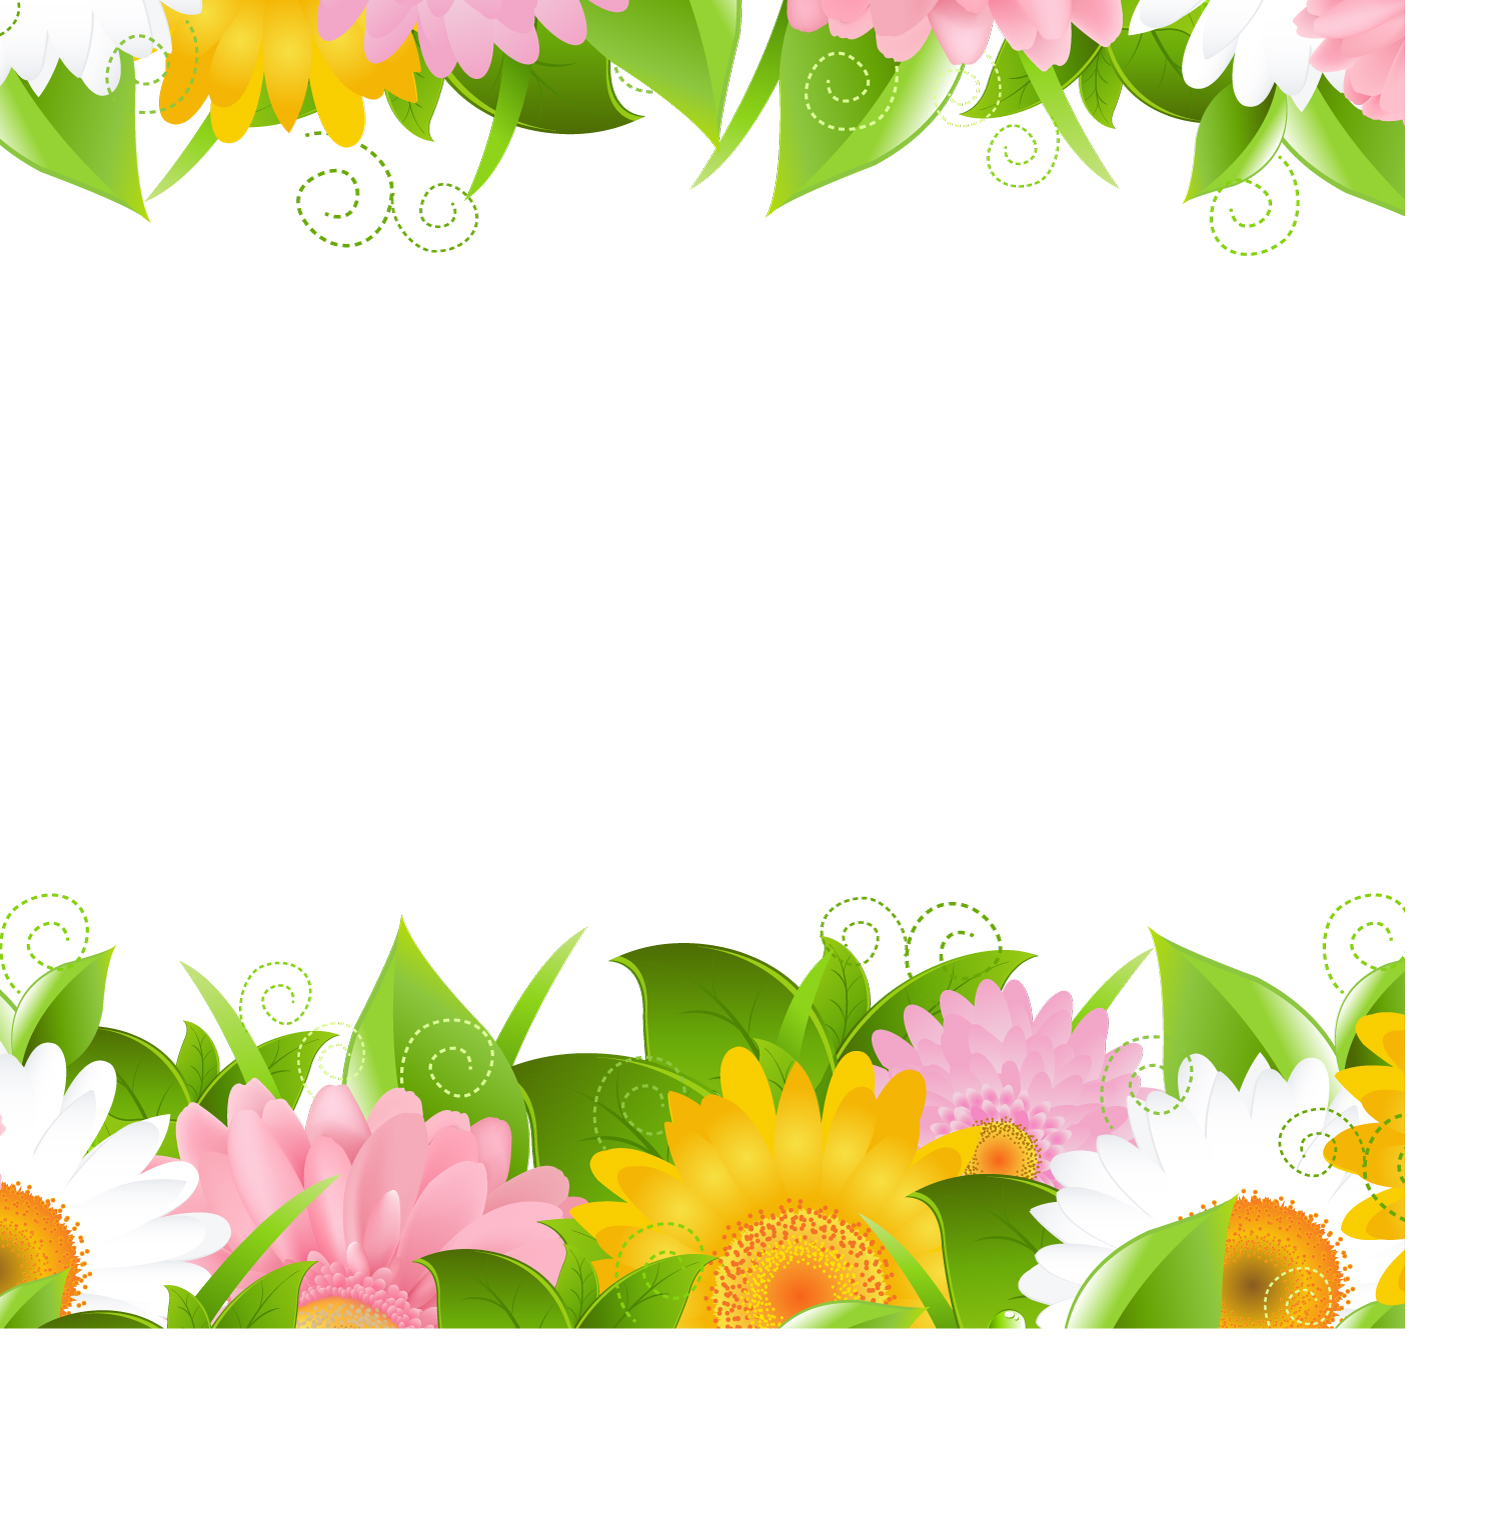 Free Vectors, Backgrounds, Clipart and more / 4Vector